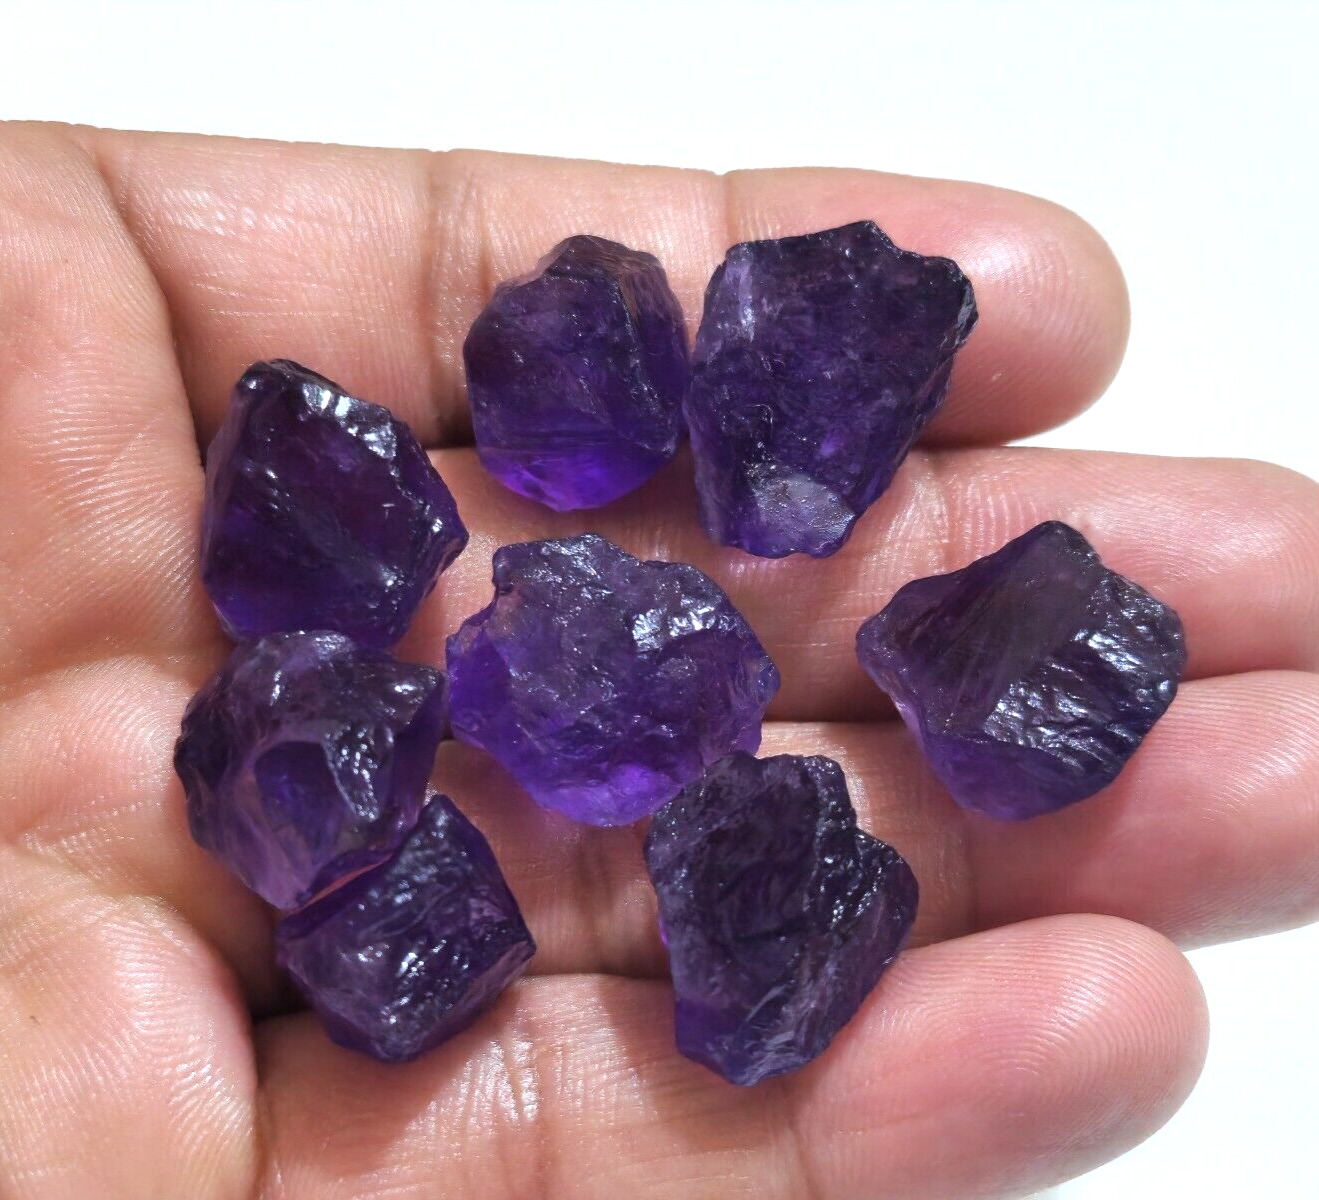 Attractive Purple Amethyst Rough 8 Pcs 15-21 mm Size Loose Gemstone For Jewelry